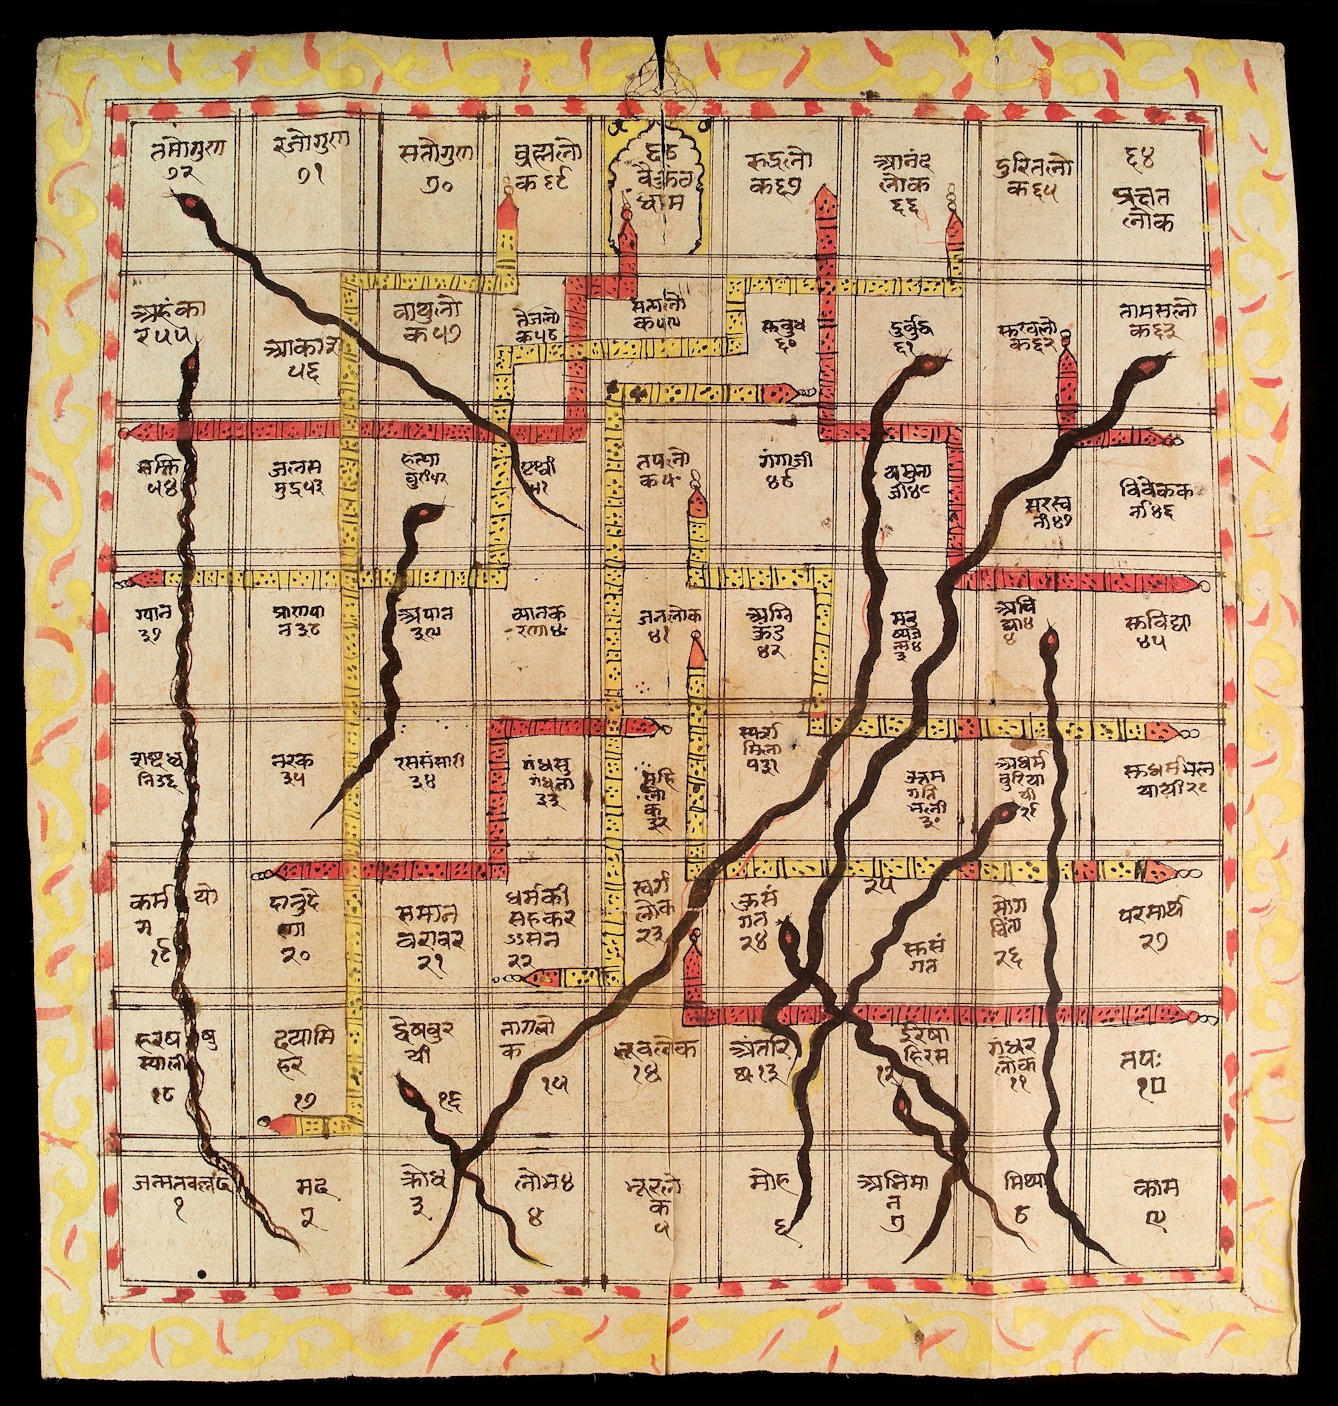 Manuscript page showing a grid 9 by 8 squares large with snakes, ladders, and Sanskrit text.